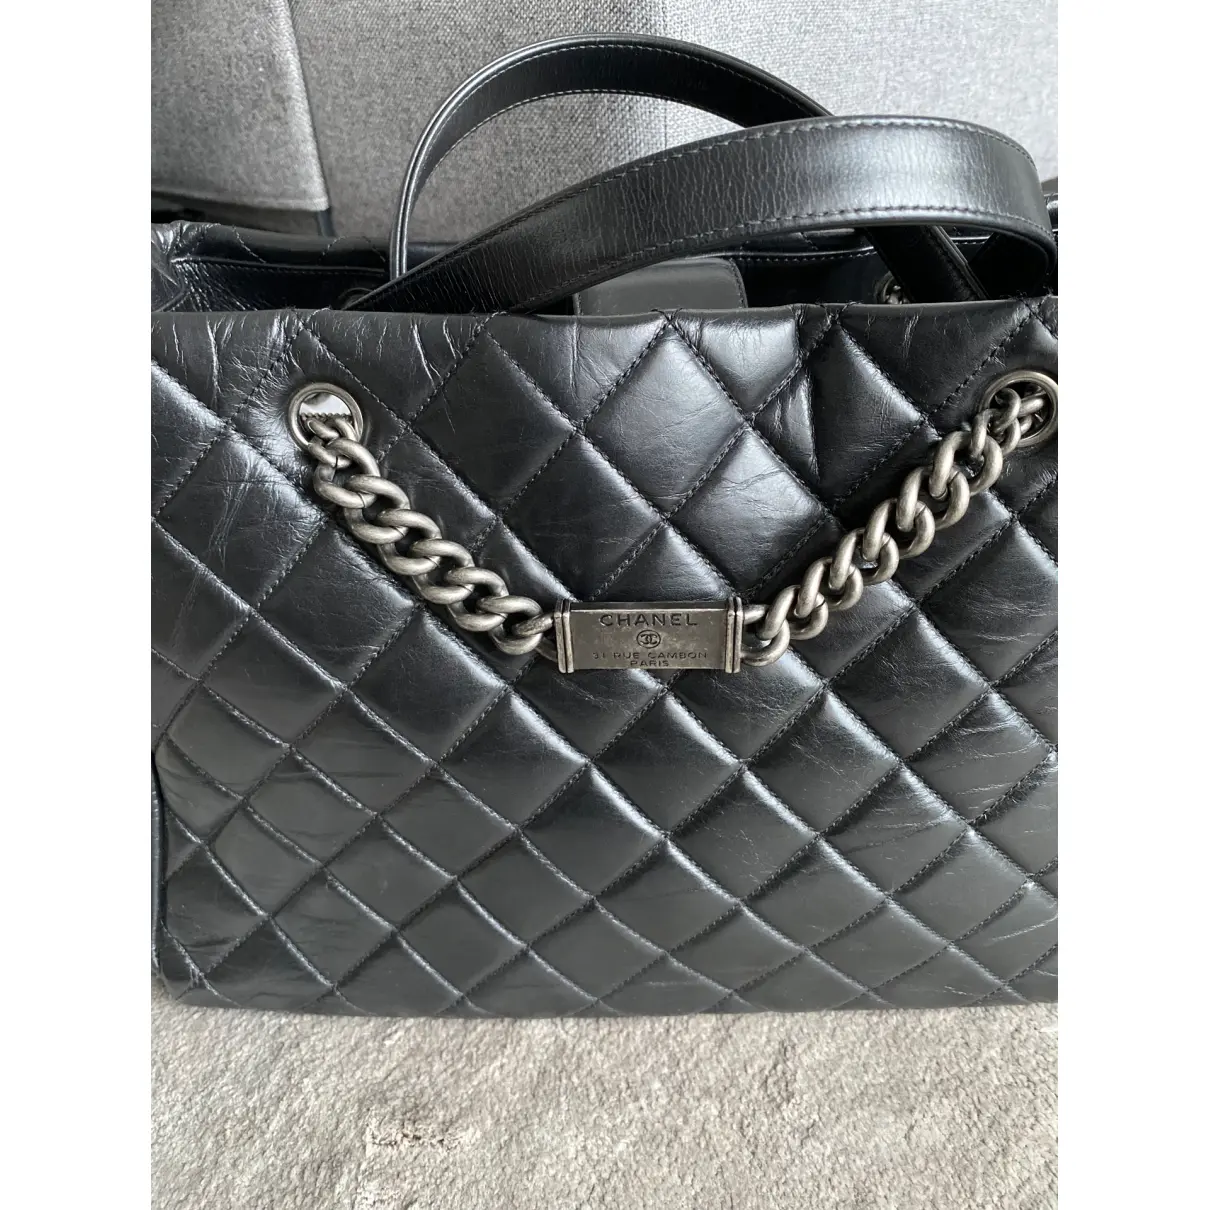 Buy Chanel Grand shopping patent leather tote online - Vintage